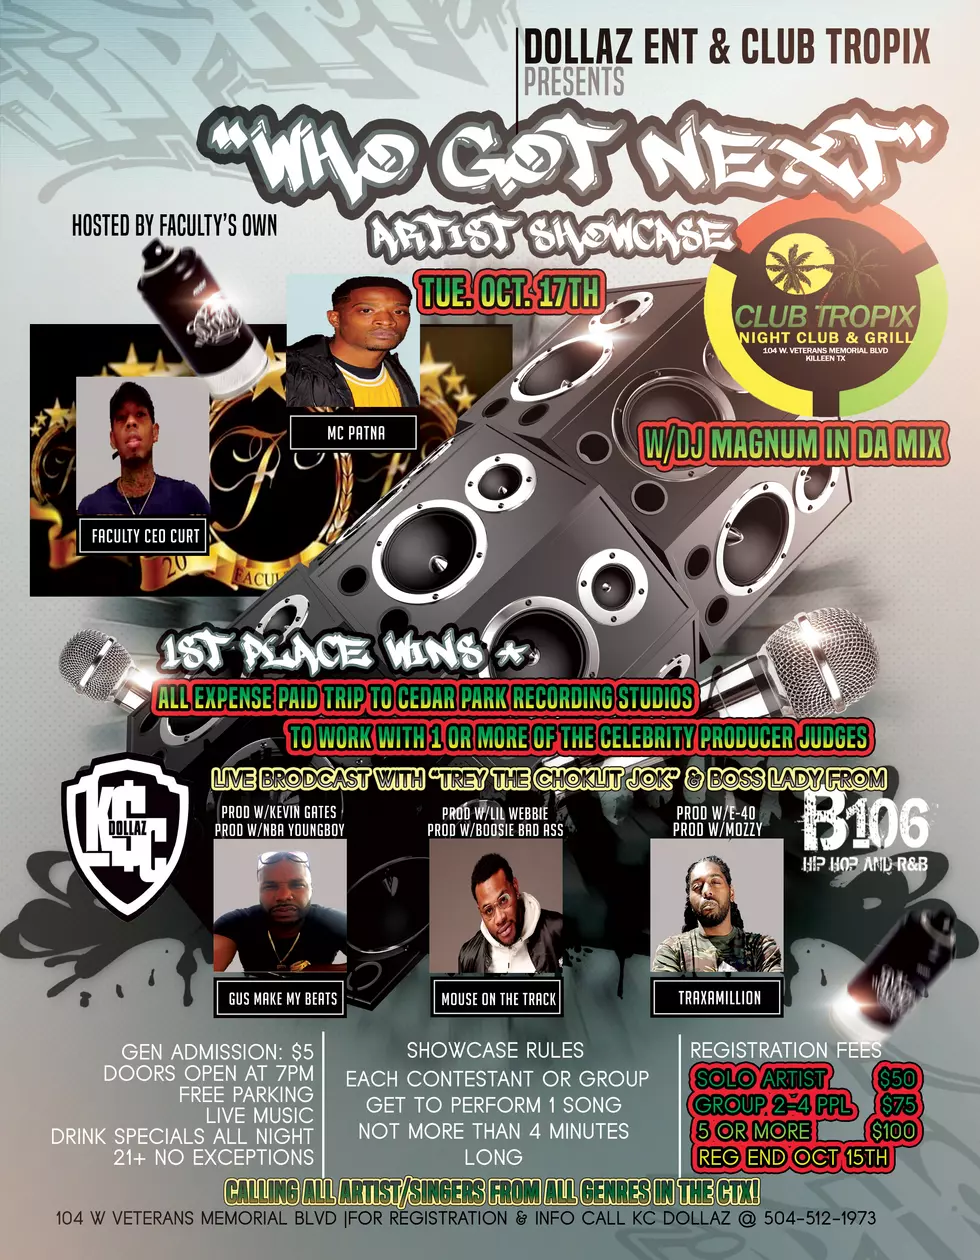 Local Artists! &#8220;Who Got Next&#8221; Artist Showcase Comes to Killeen October 17th!